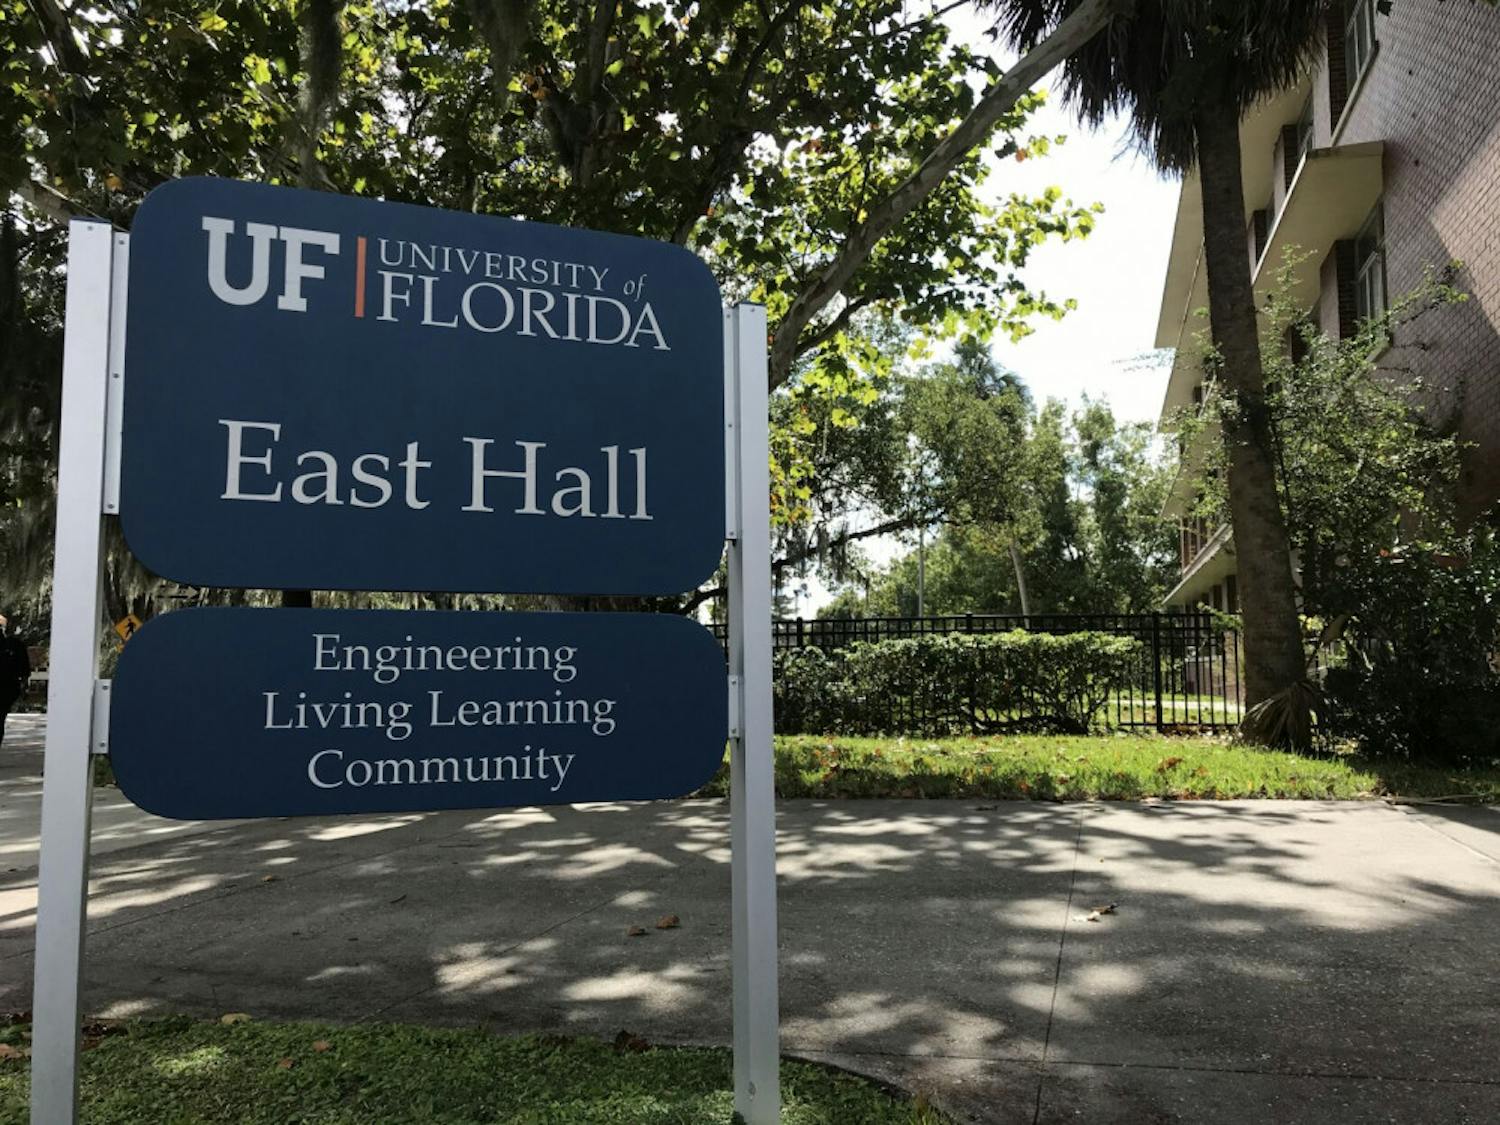 Starting next month, East Hall residents will be relocated to free up more quarantine space for the Spring semester.